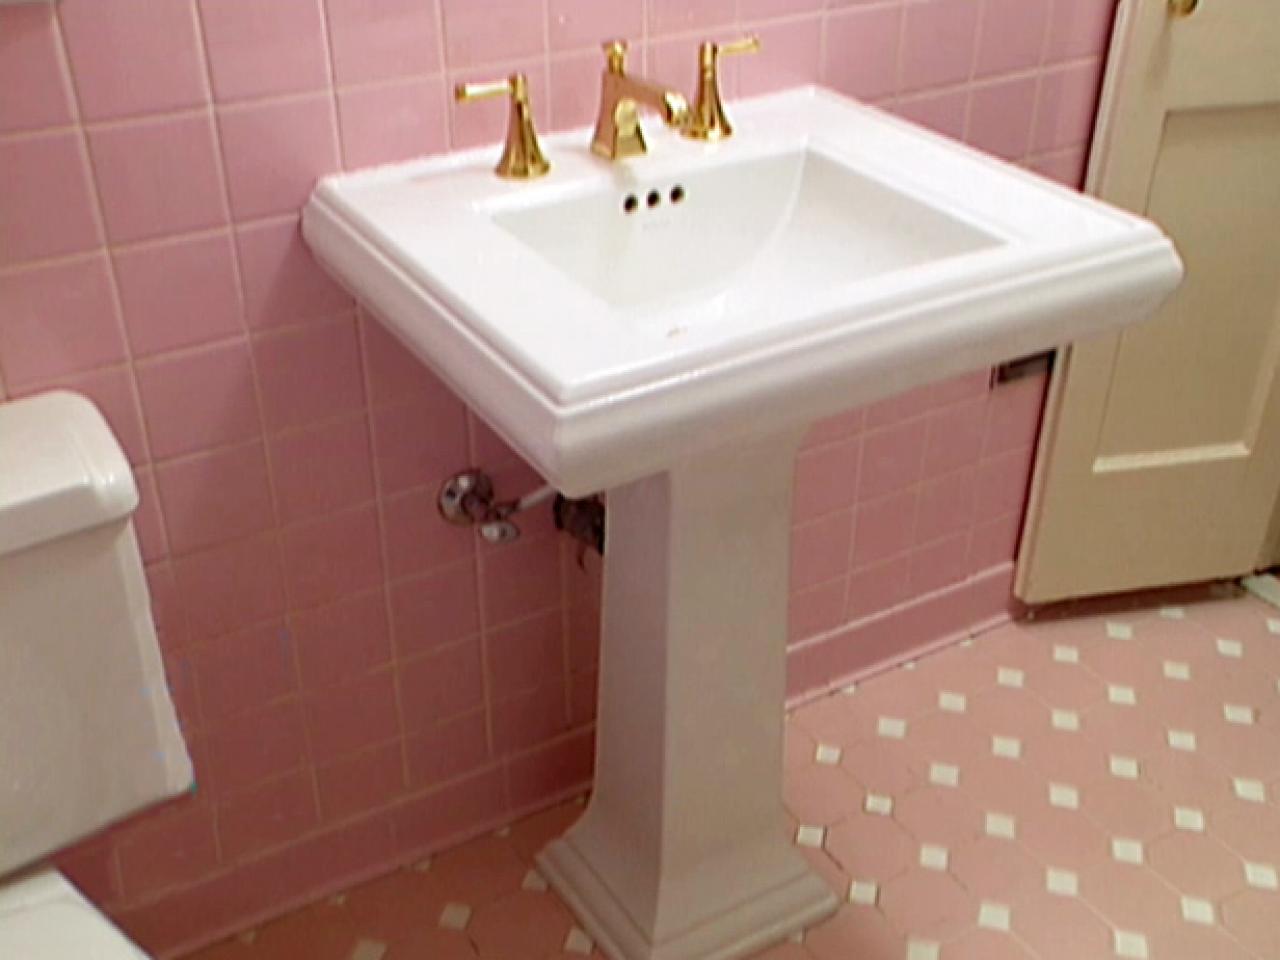 Pedestal Sink Installation How Tos Diy, How To Remove A Pedestal Vanity Tables